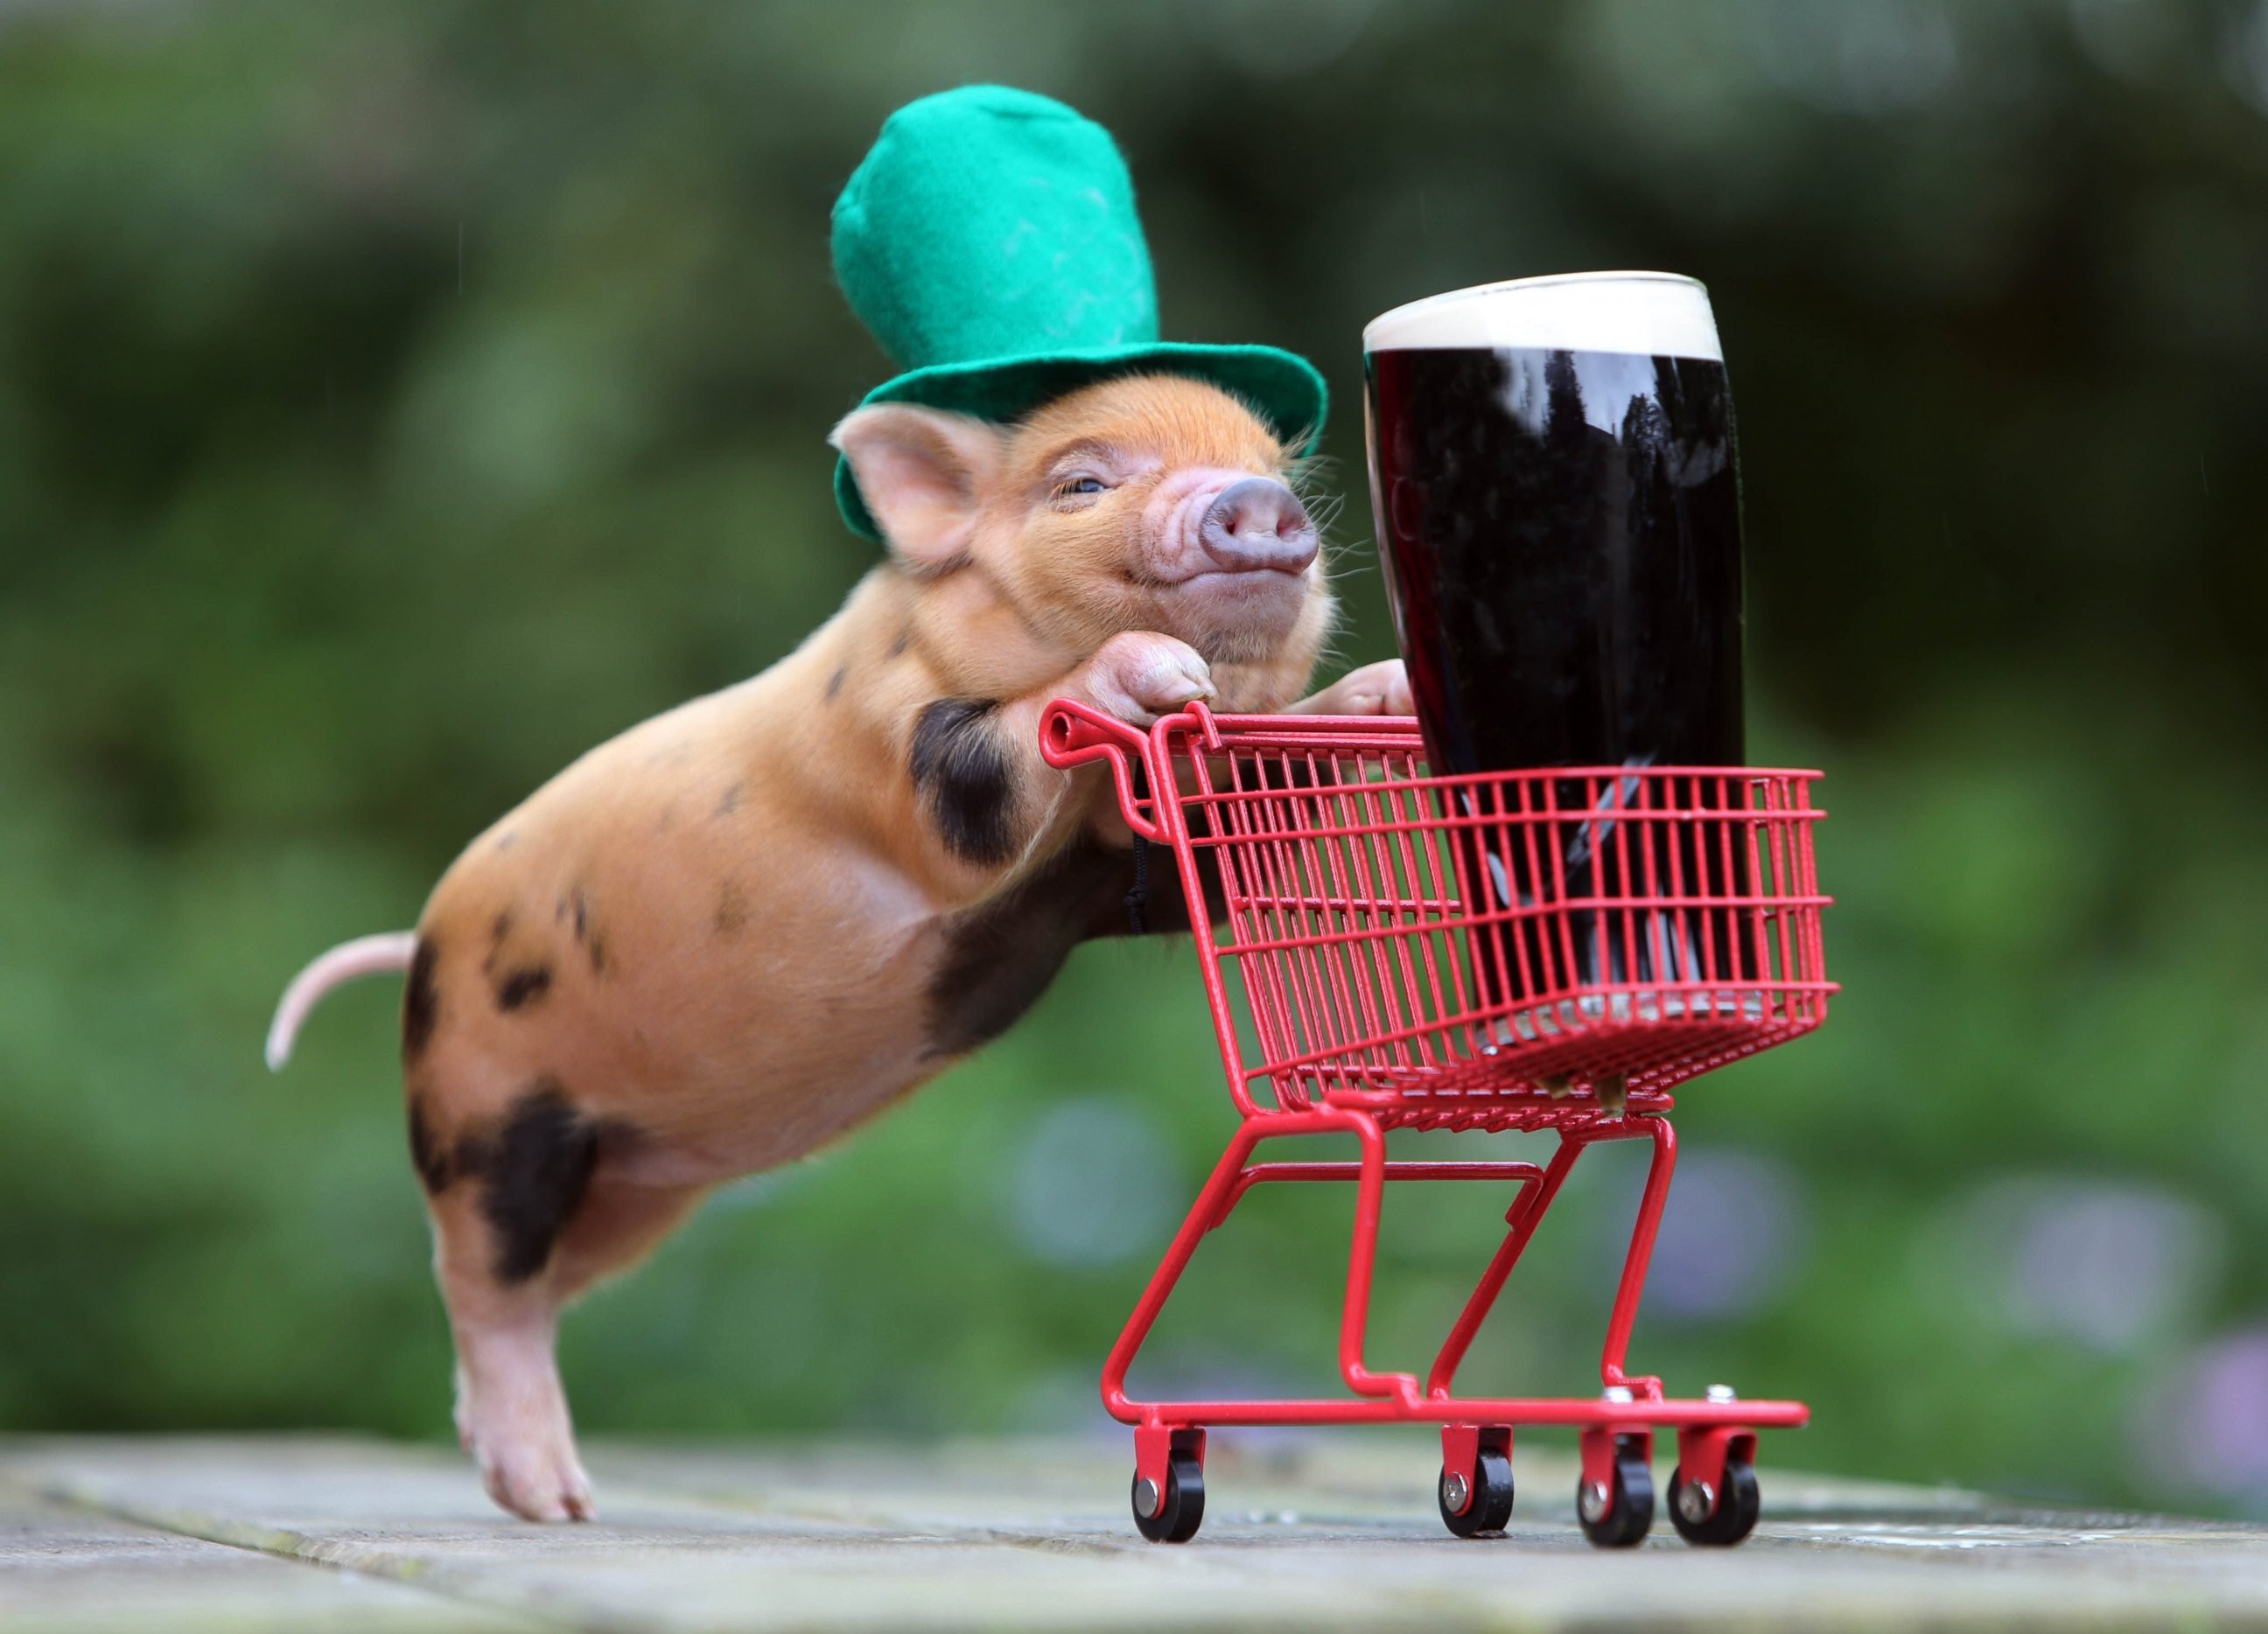 General 2592x1868 humor beer shopping cart funny hats baby animals pigs Guinness top hats animals mammals drinking glass hat drinking problems